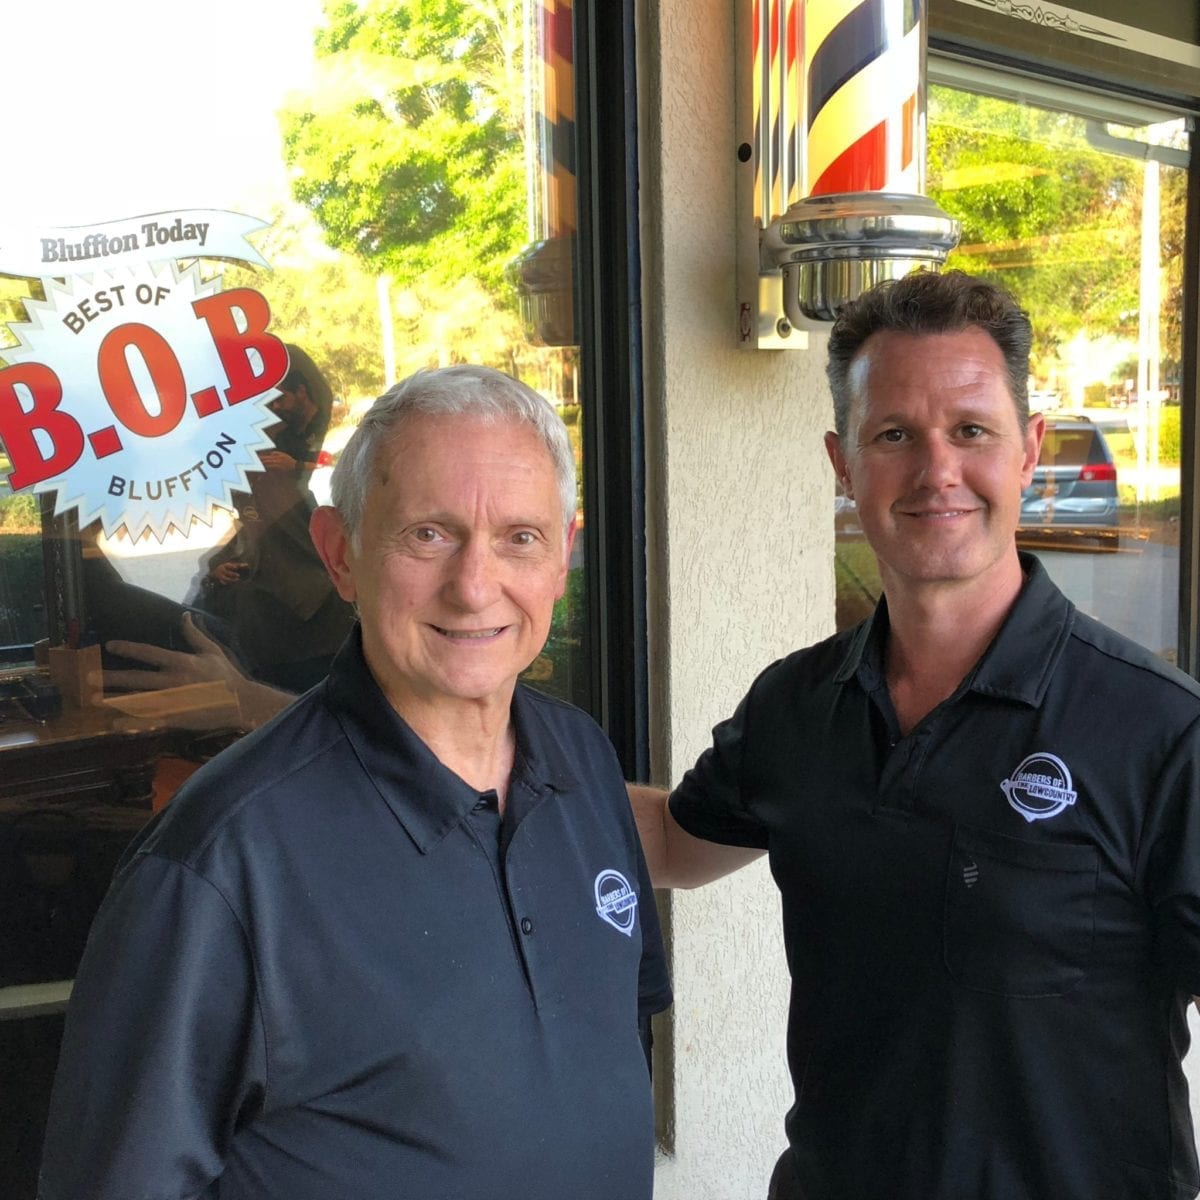 Lou Nelsen and Brent Nelsen pose in front of their barber pole at the Barbers of the Lowcountry shop located in Bluffton SC